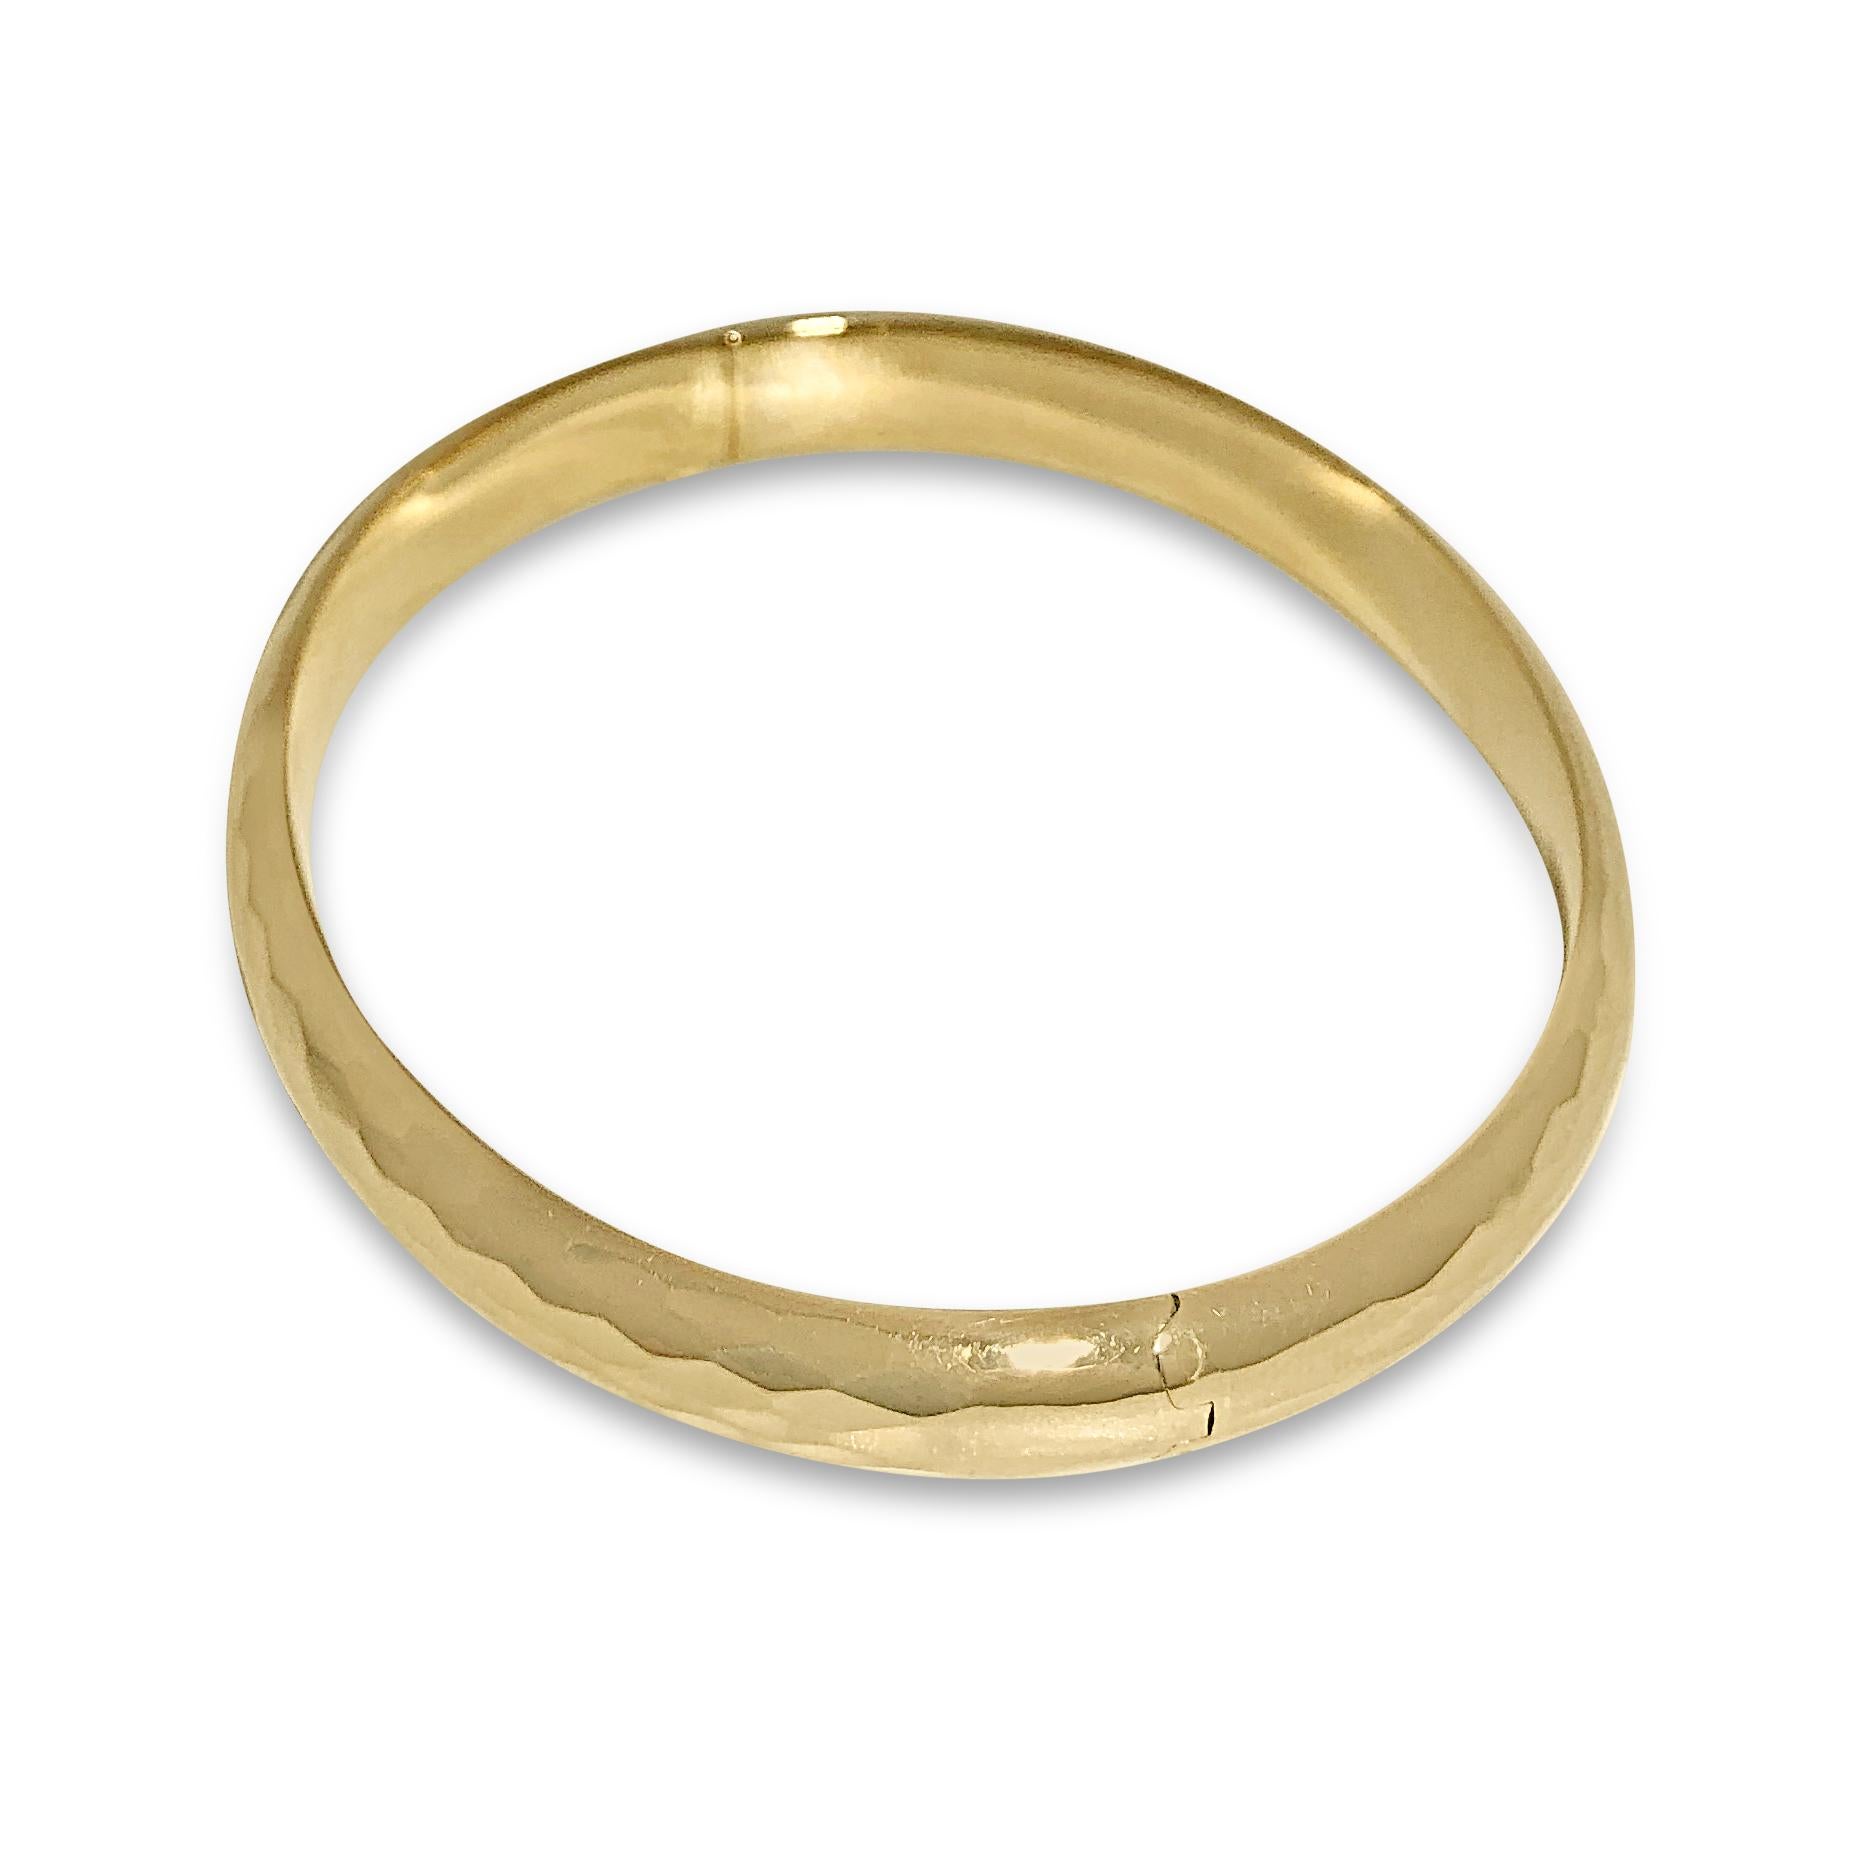 Our high-polish 14K yellow gold hammered cuff bangle is fashionably faceted to catch the light from every direction. The oval-shaped bangle measures 5/16” wide with a snap & hinge closure.

Specifications:
- Shape: Oval
- Dimension: 6 5/8